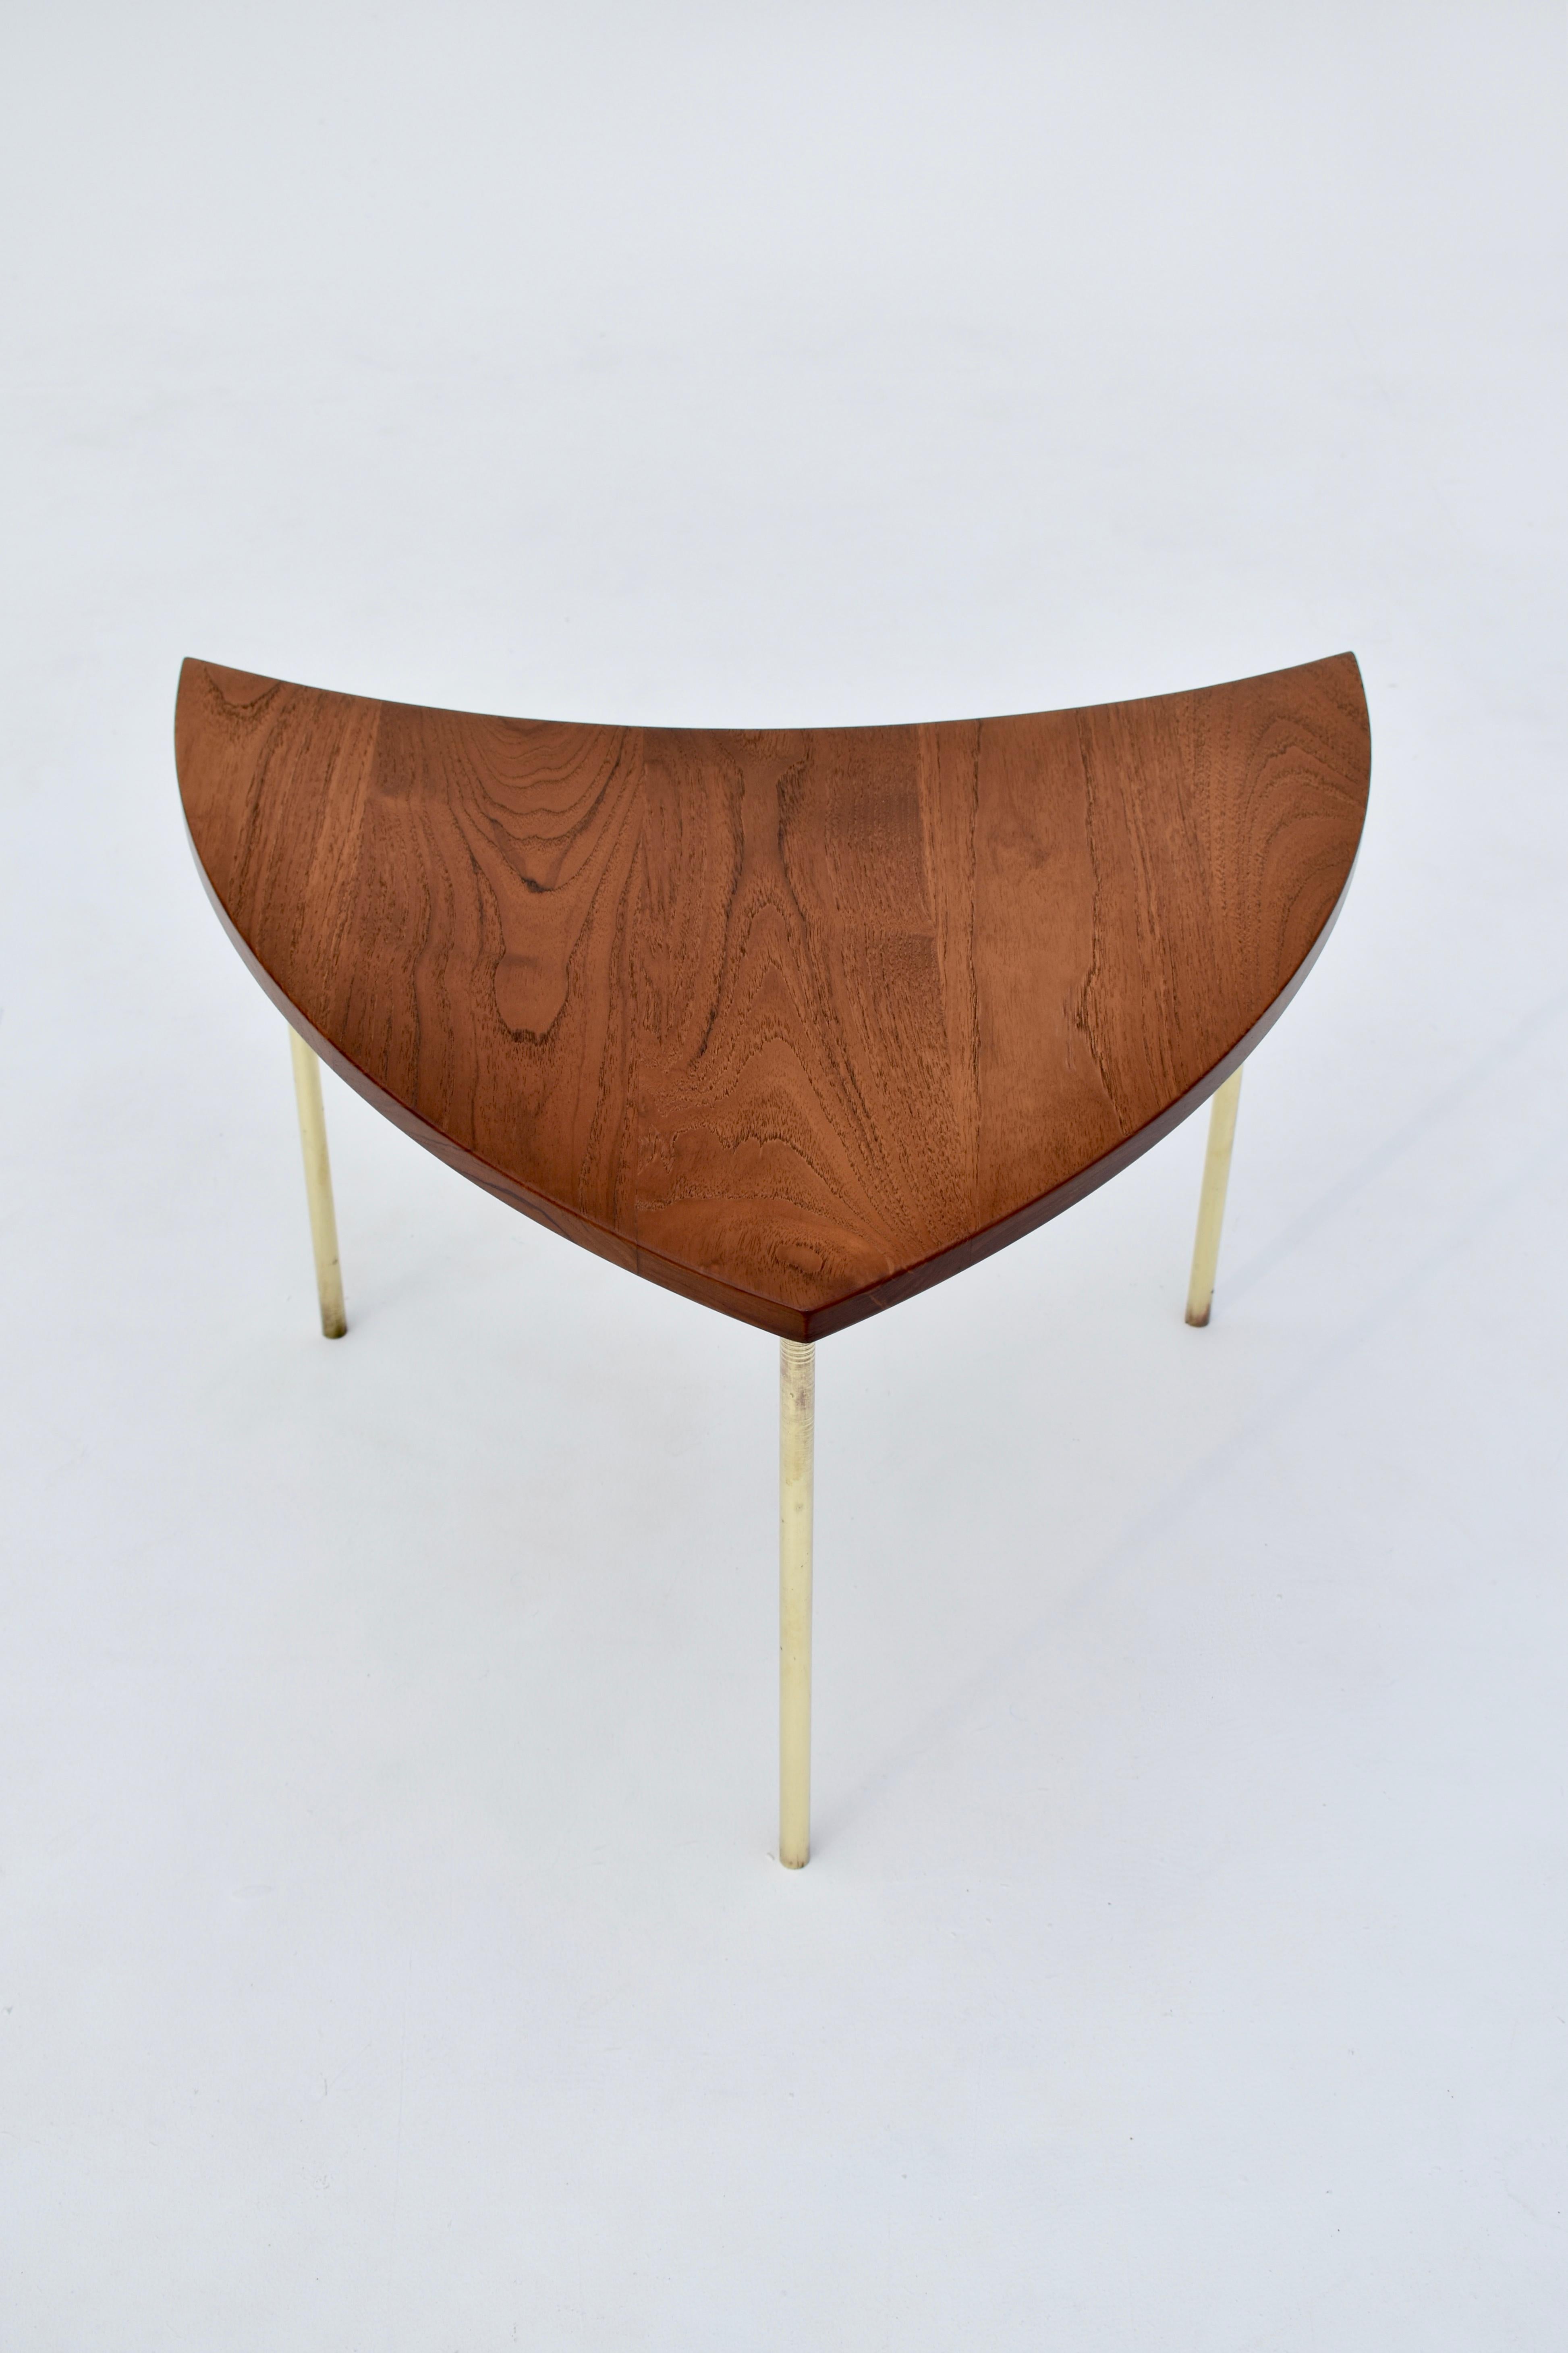 A very hard to find Pinwheel table designed in the mid-1950s by Hvidt & Molgaard.

This listing is for a single table. Produced from solid teak with brass-plated legs.

An incredibly eye-catching and elegant design. Excellent as a statement side